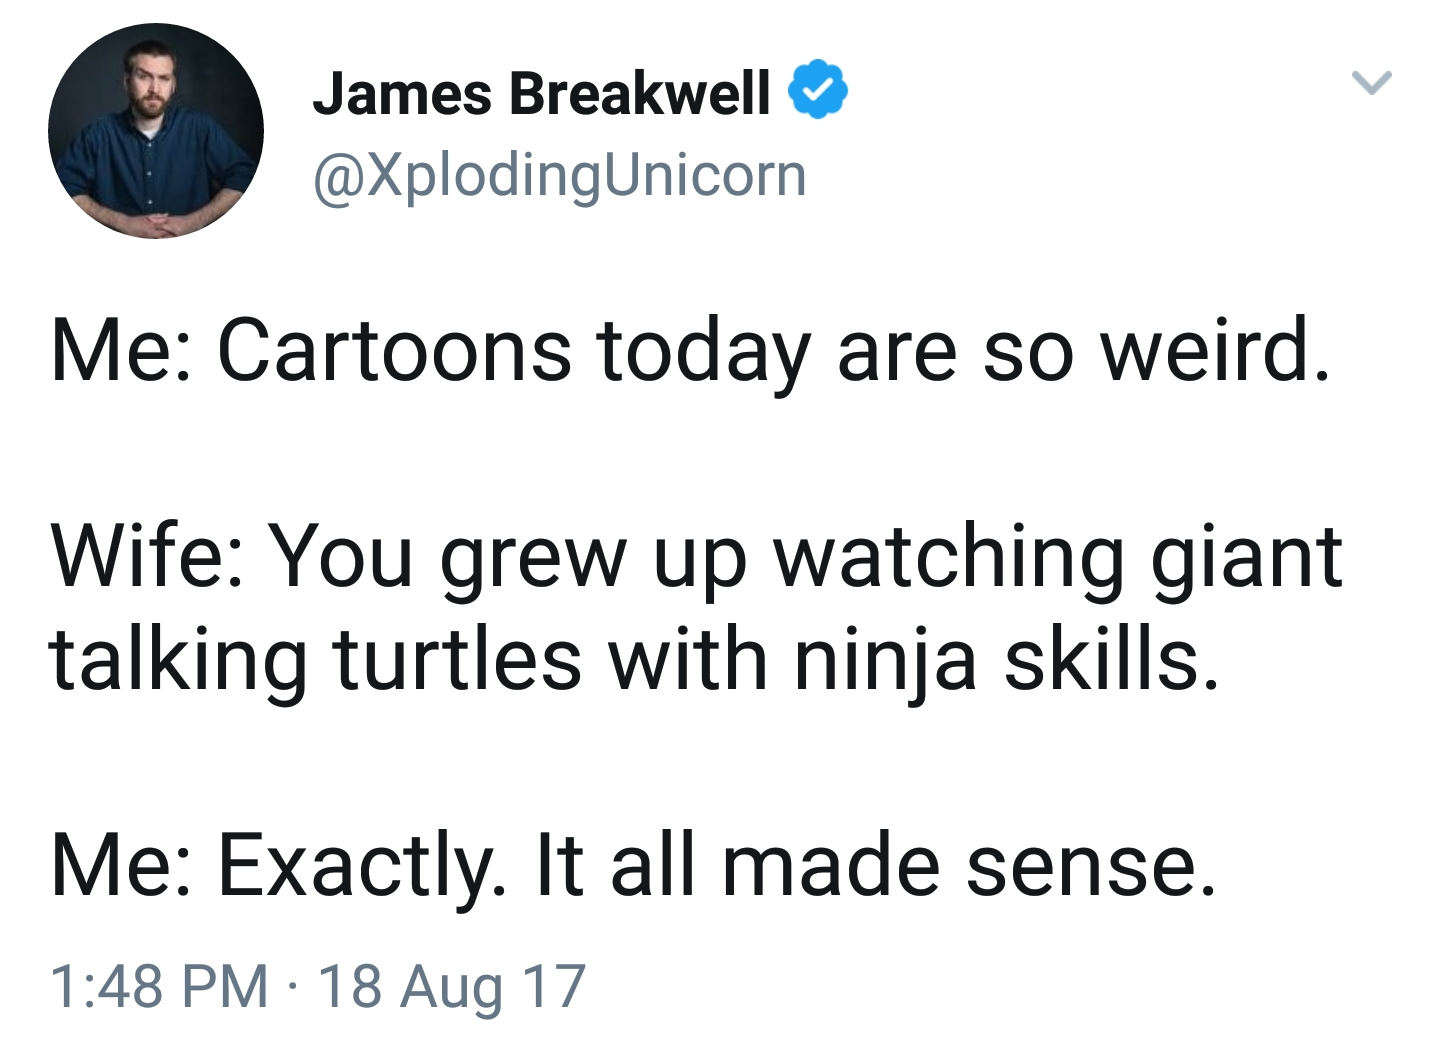 angle - James Breakwell Me Cartoons today are so weird. Wife You grew up watching giant talking turtles with ninja skills. Me Exactly. It all made sense. 18 Aug 17